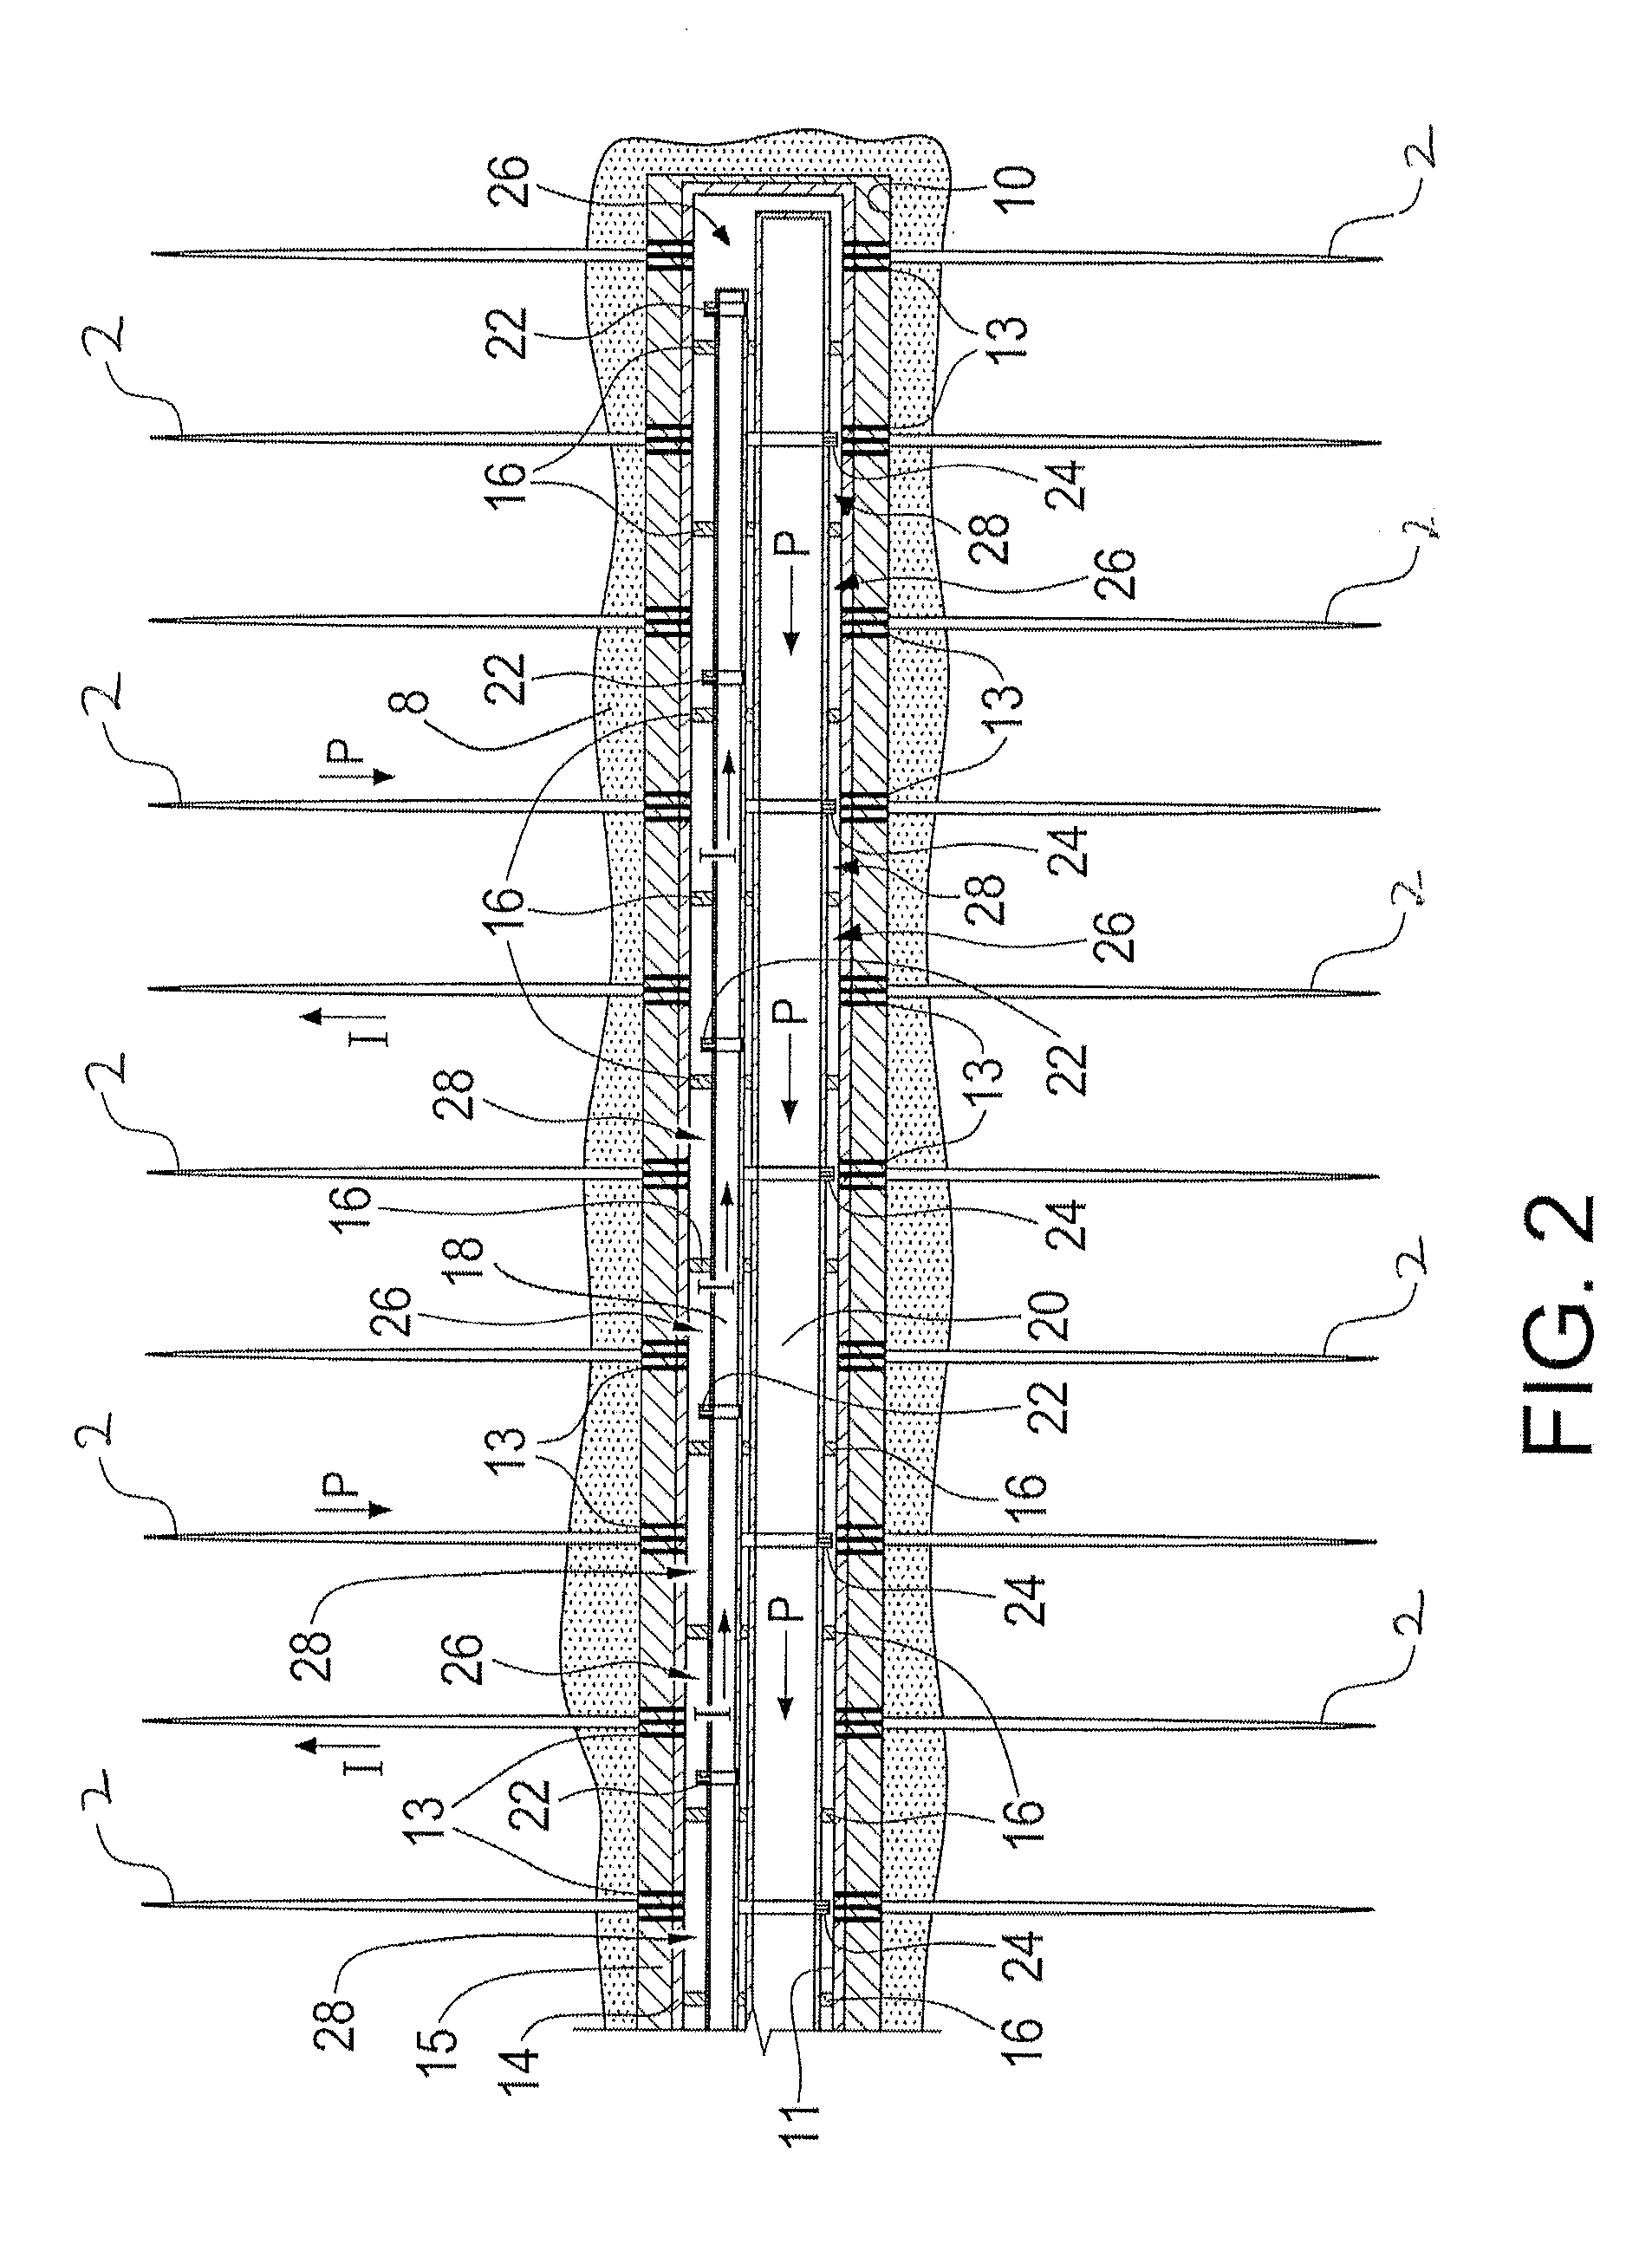 Well injection and production methods, apparatus and systems